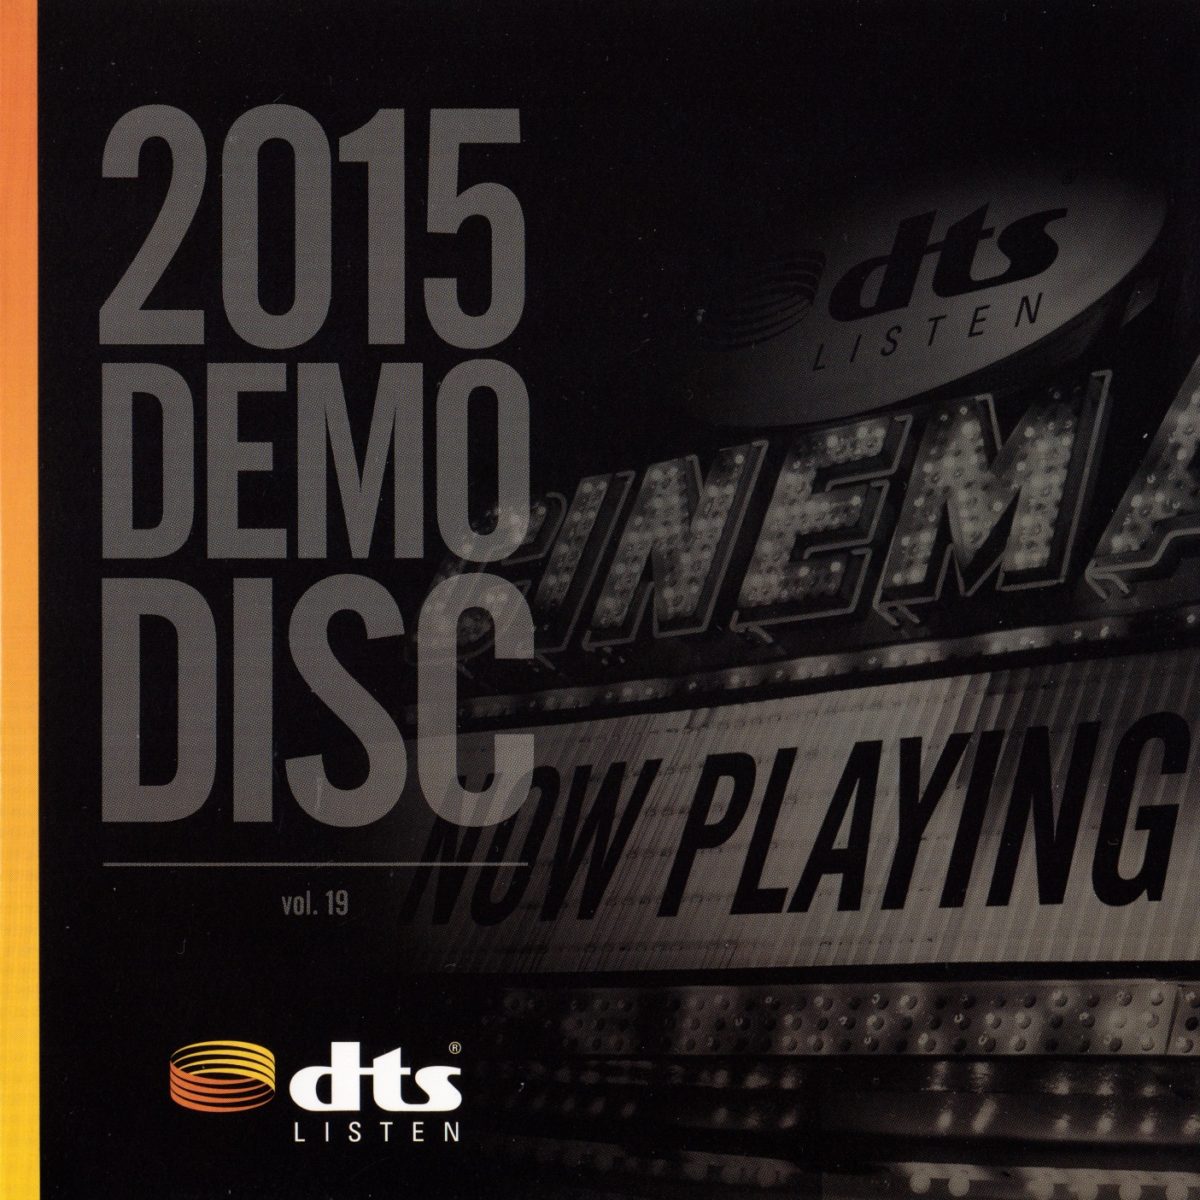 dolby atmos demo disc 2019